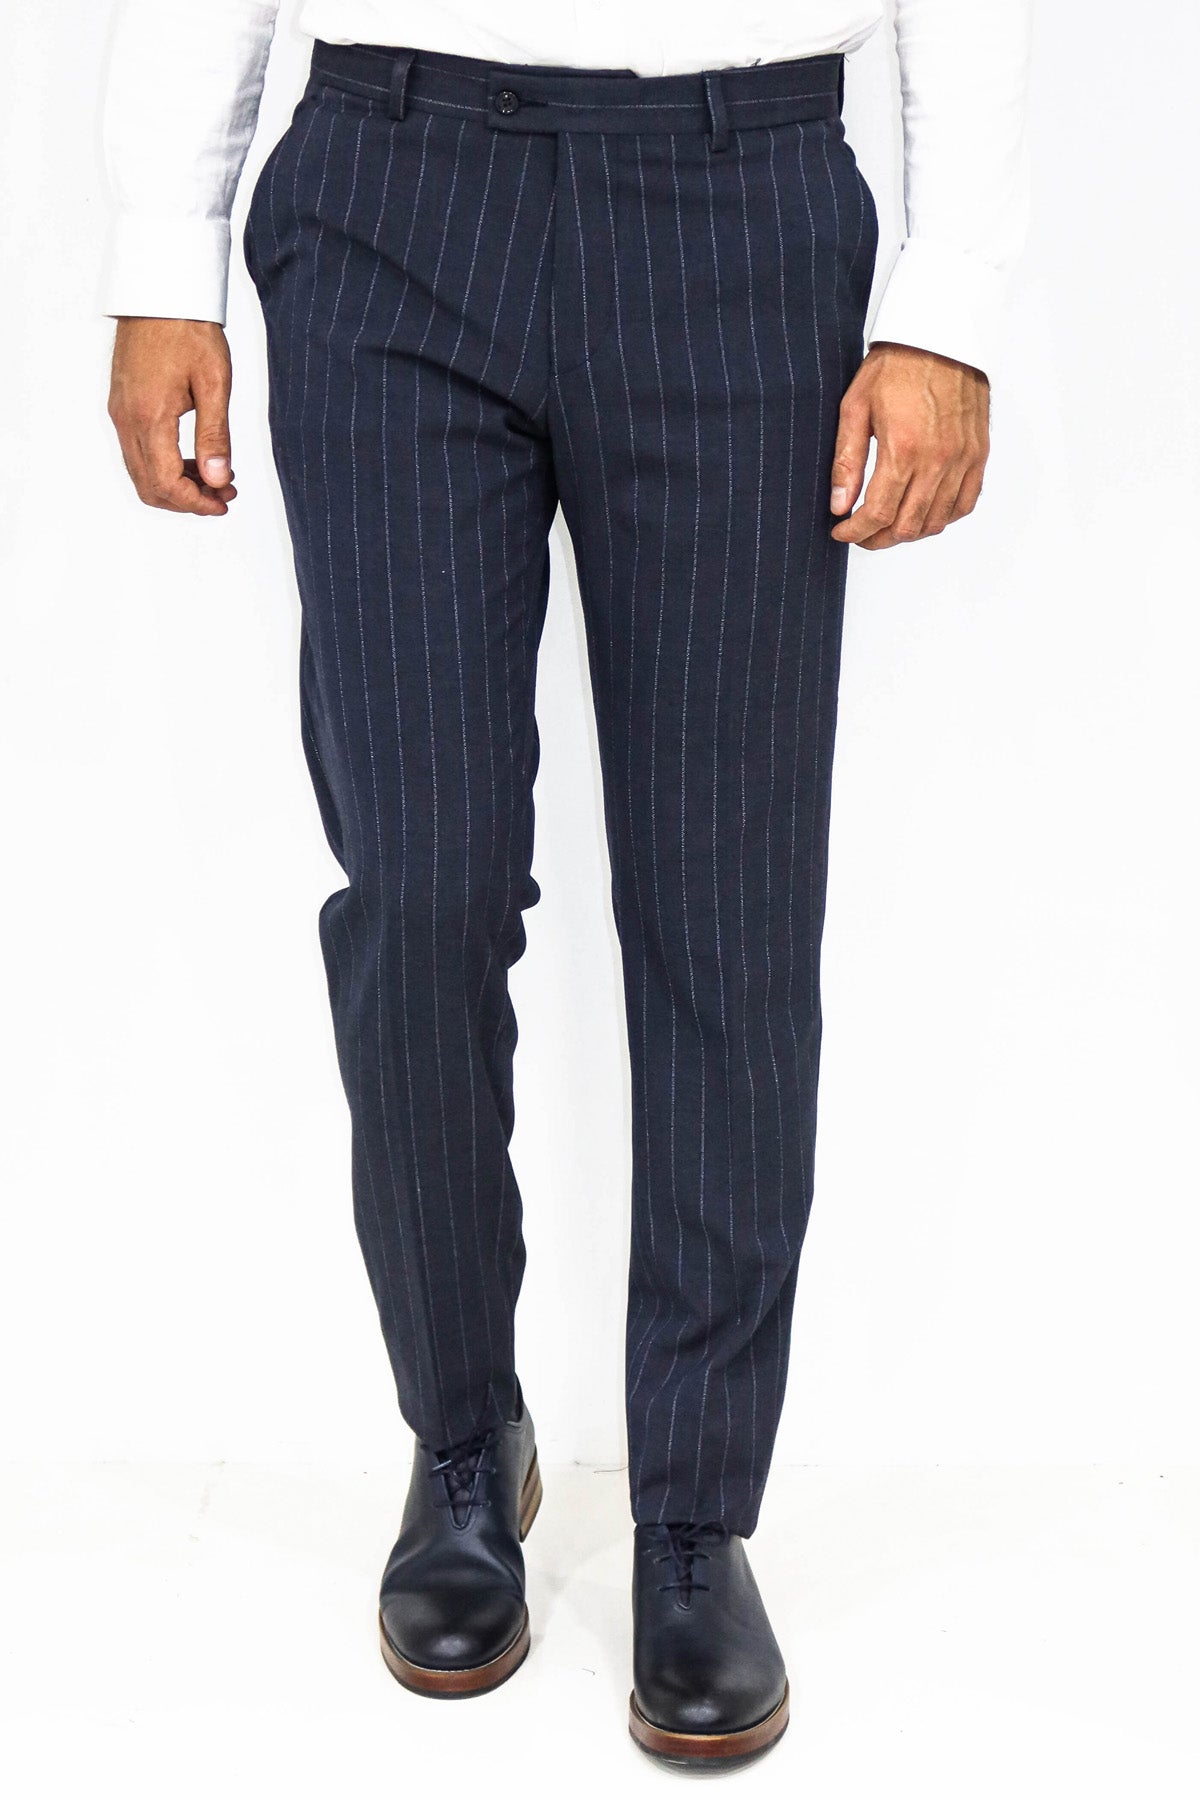 Buy Cairon Striped Formal Pants (TC-C1331_A_34) Black at Amazon.in